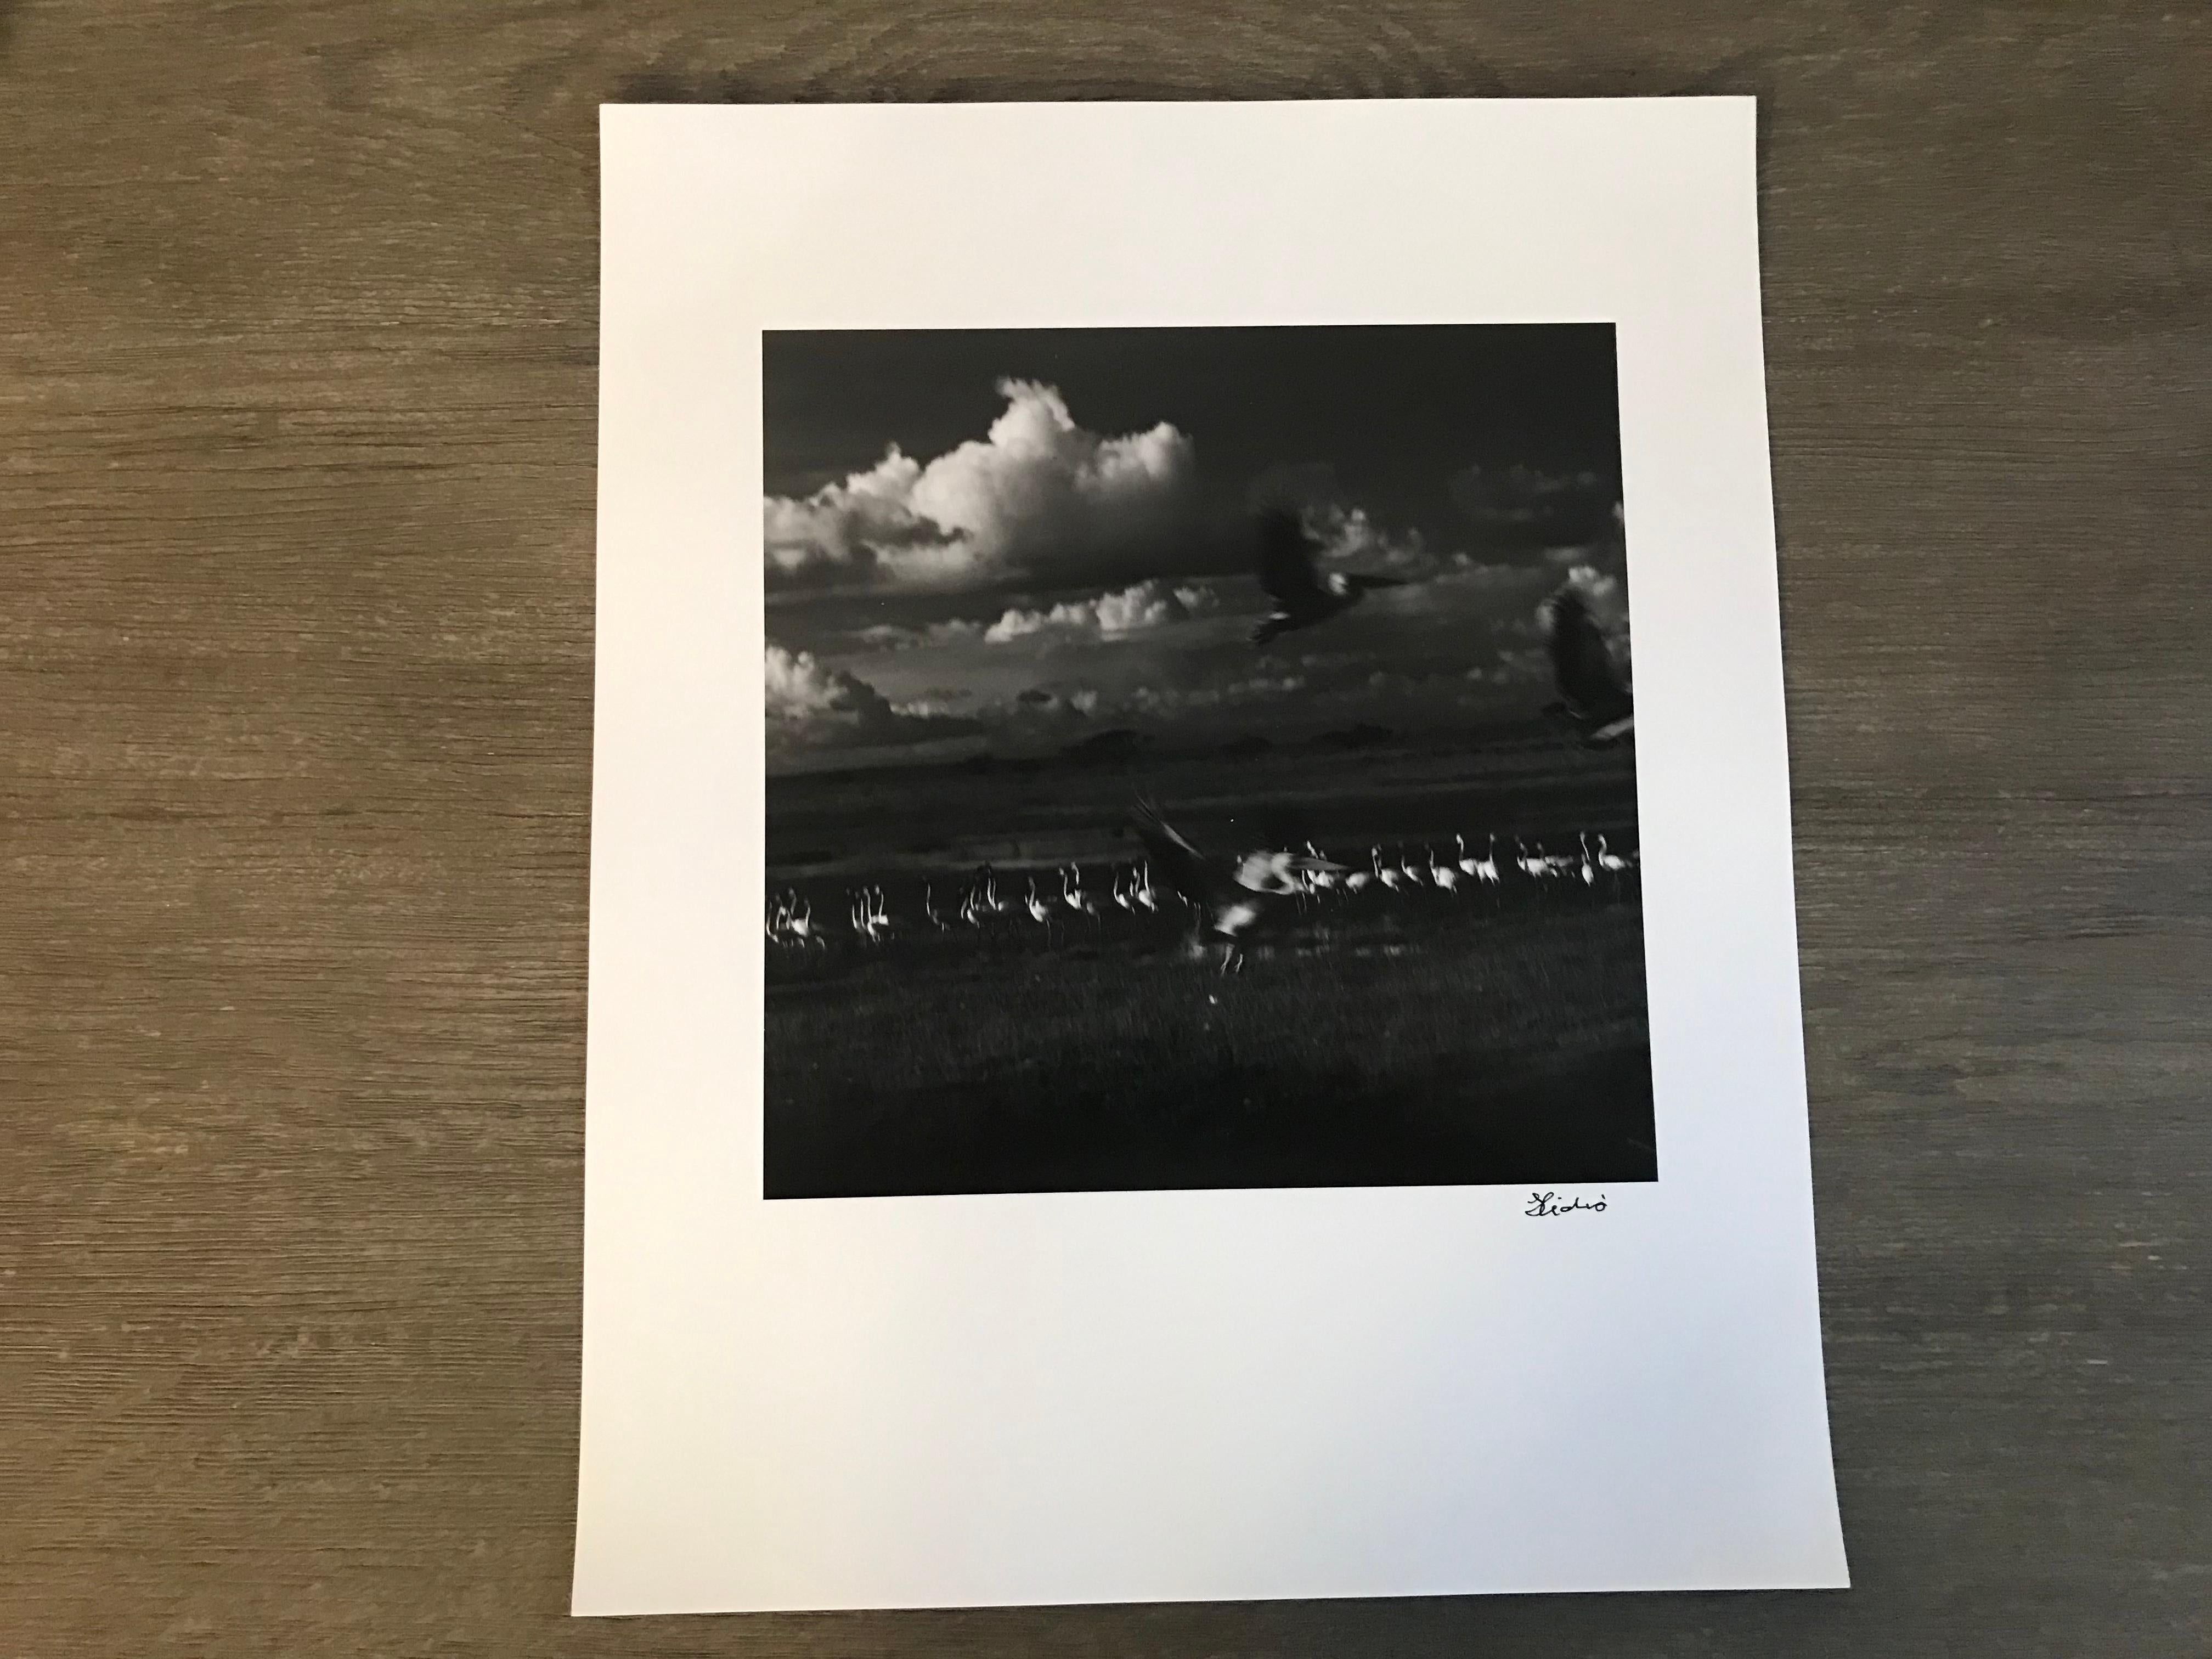 Photos of Hideoki™ are being sold for the first time in 2019. This piece is a one and only original artist silver gelatin print affixed with his signature in front of the photo.

Hideoki was born in 1942 in the mountains of Nagano in Suwa City,